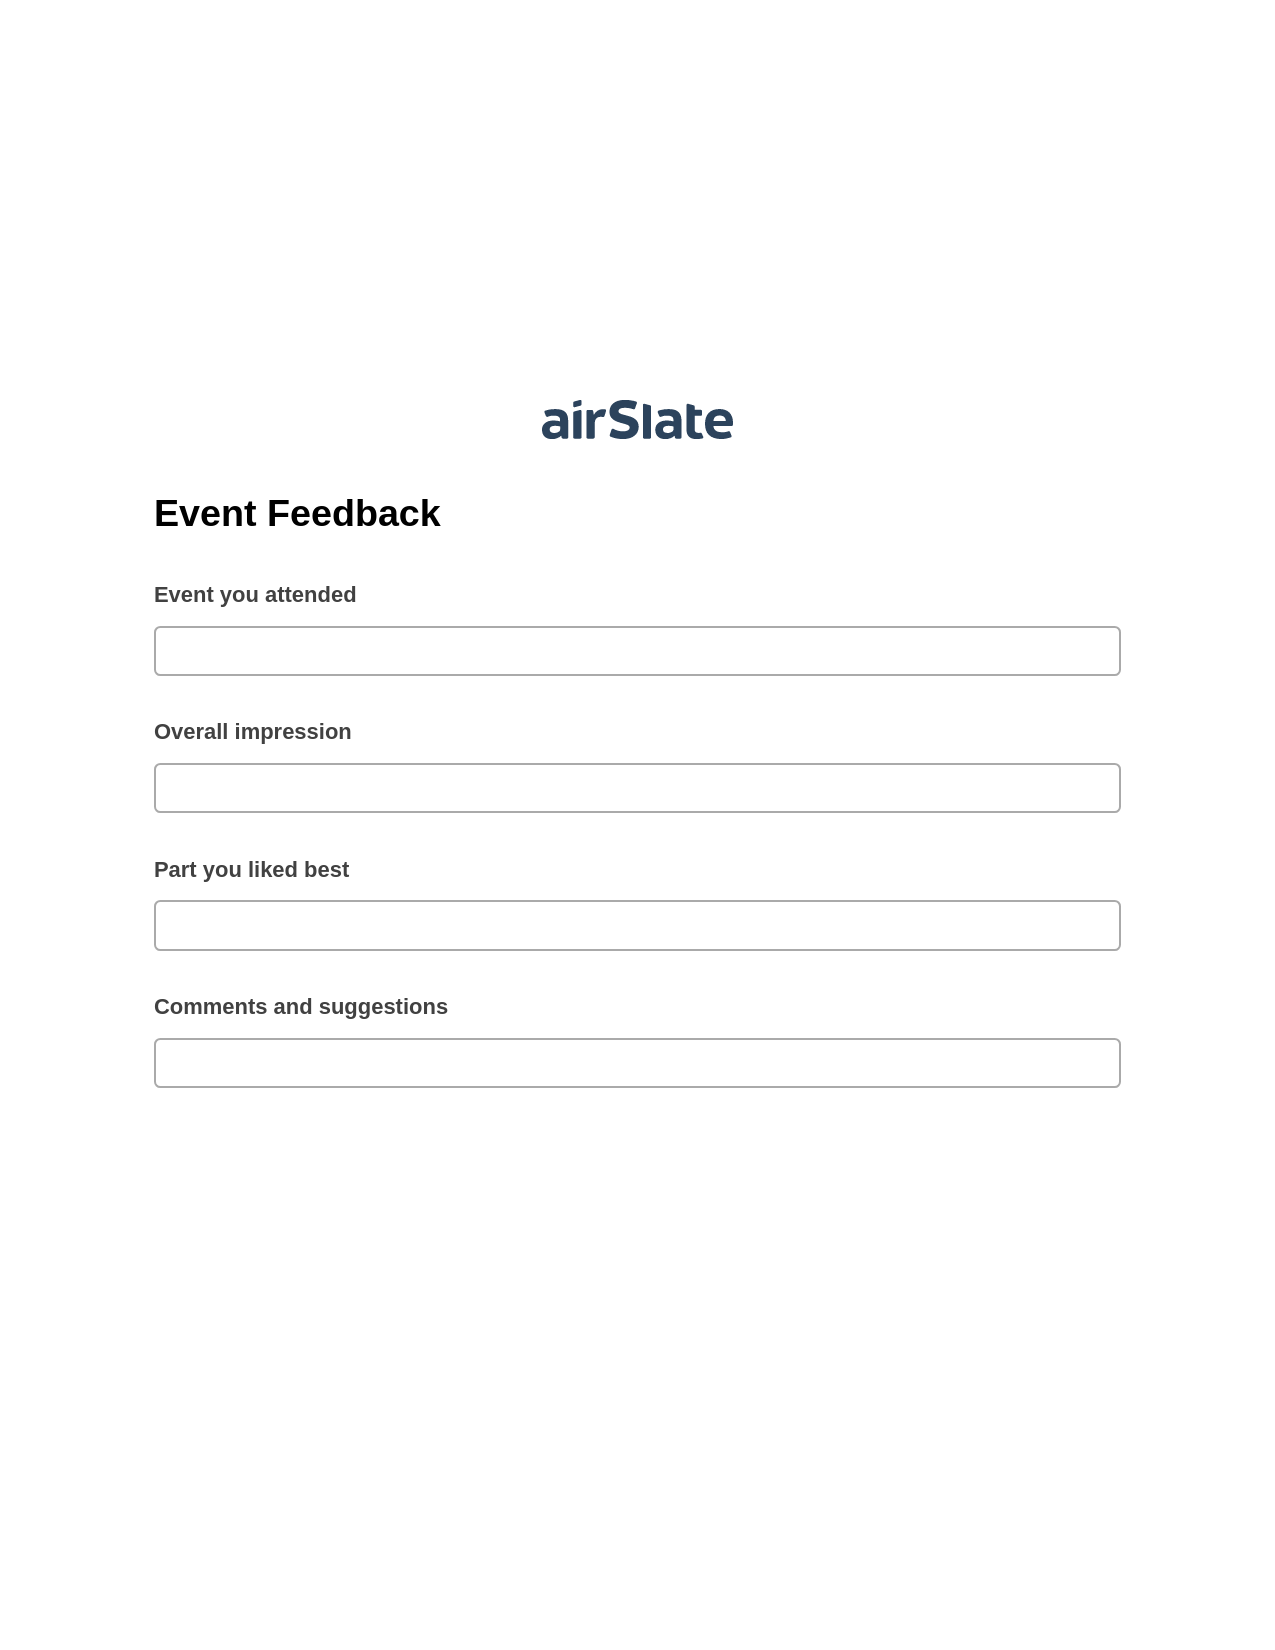 Event Feedback Pre-fill from MySQL Bot, Create slate addon, Export to Salesforce Bot